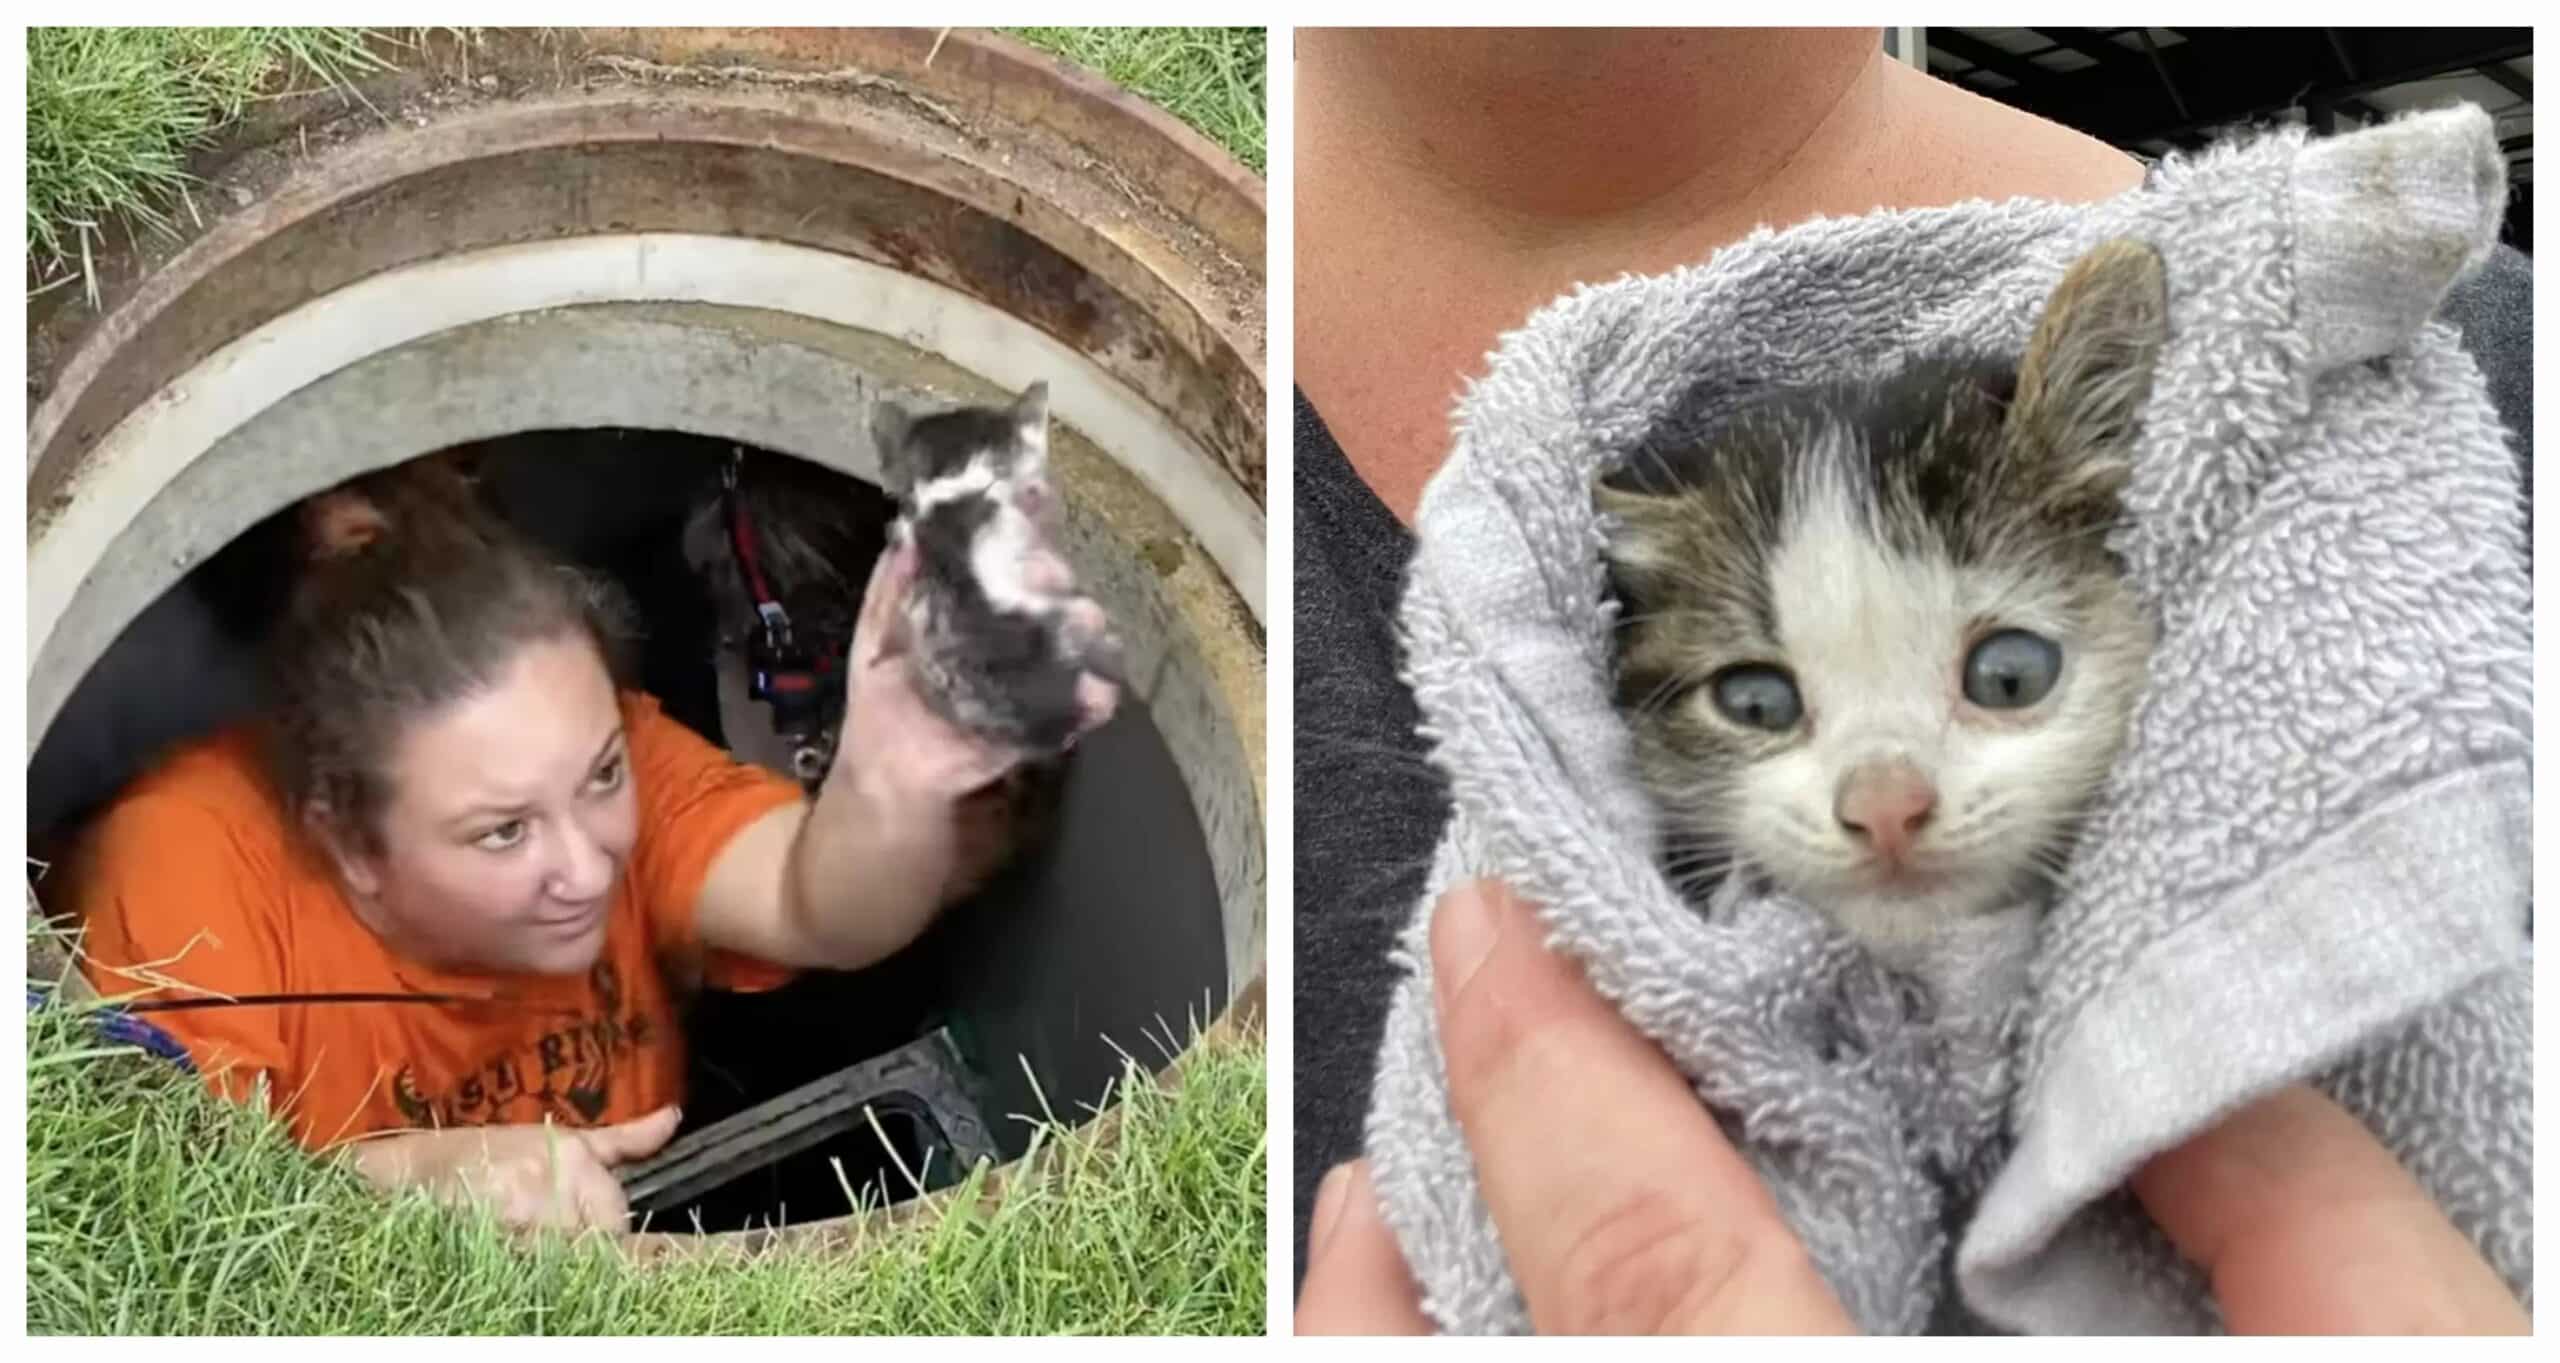 The Kitten Reunites With Its Mother After A Traumatic 40 Hours in a Drainpipe